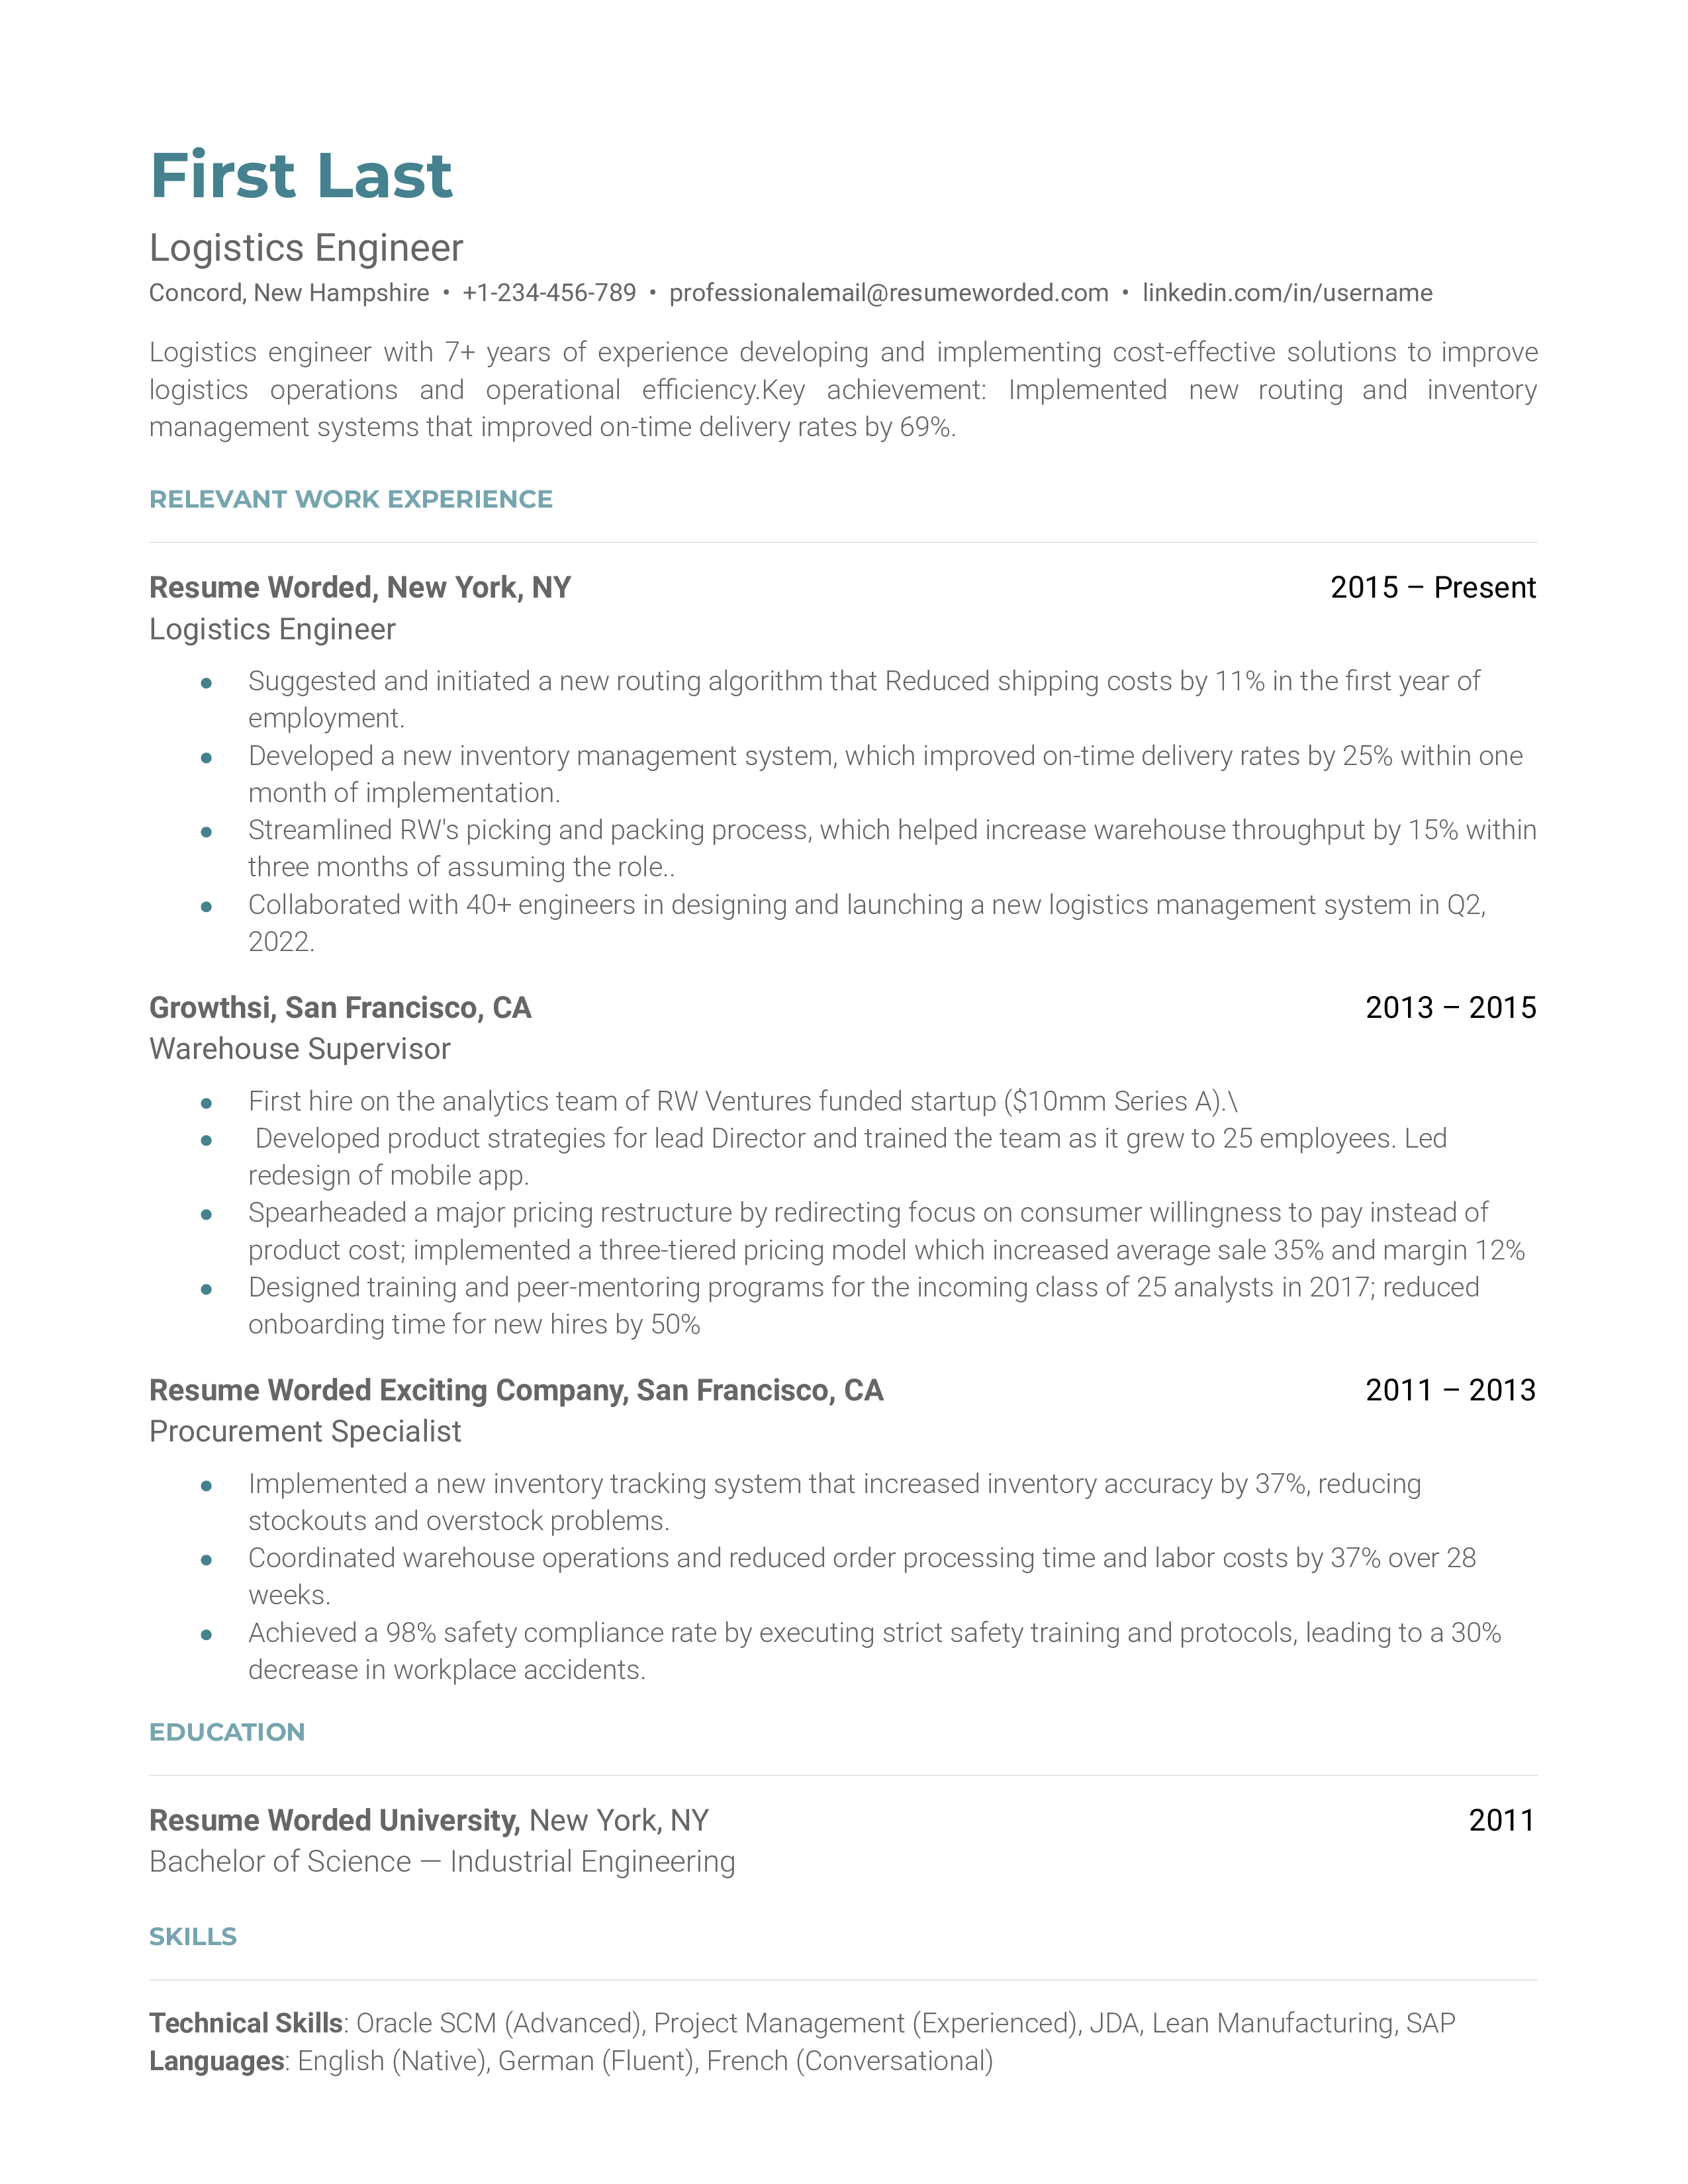 A professional resume for a Logistics Engineer role.